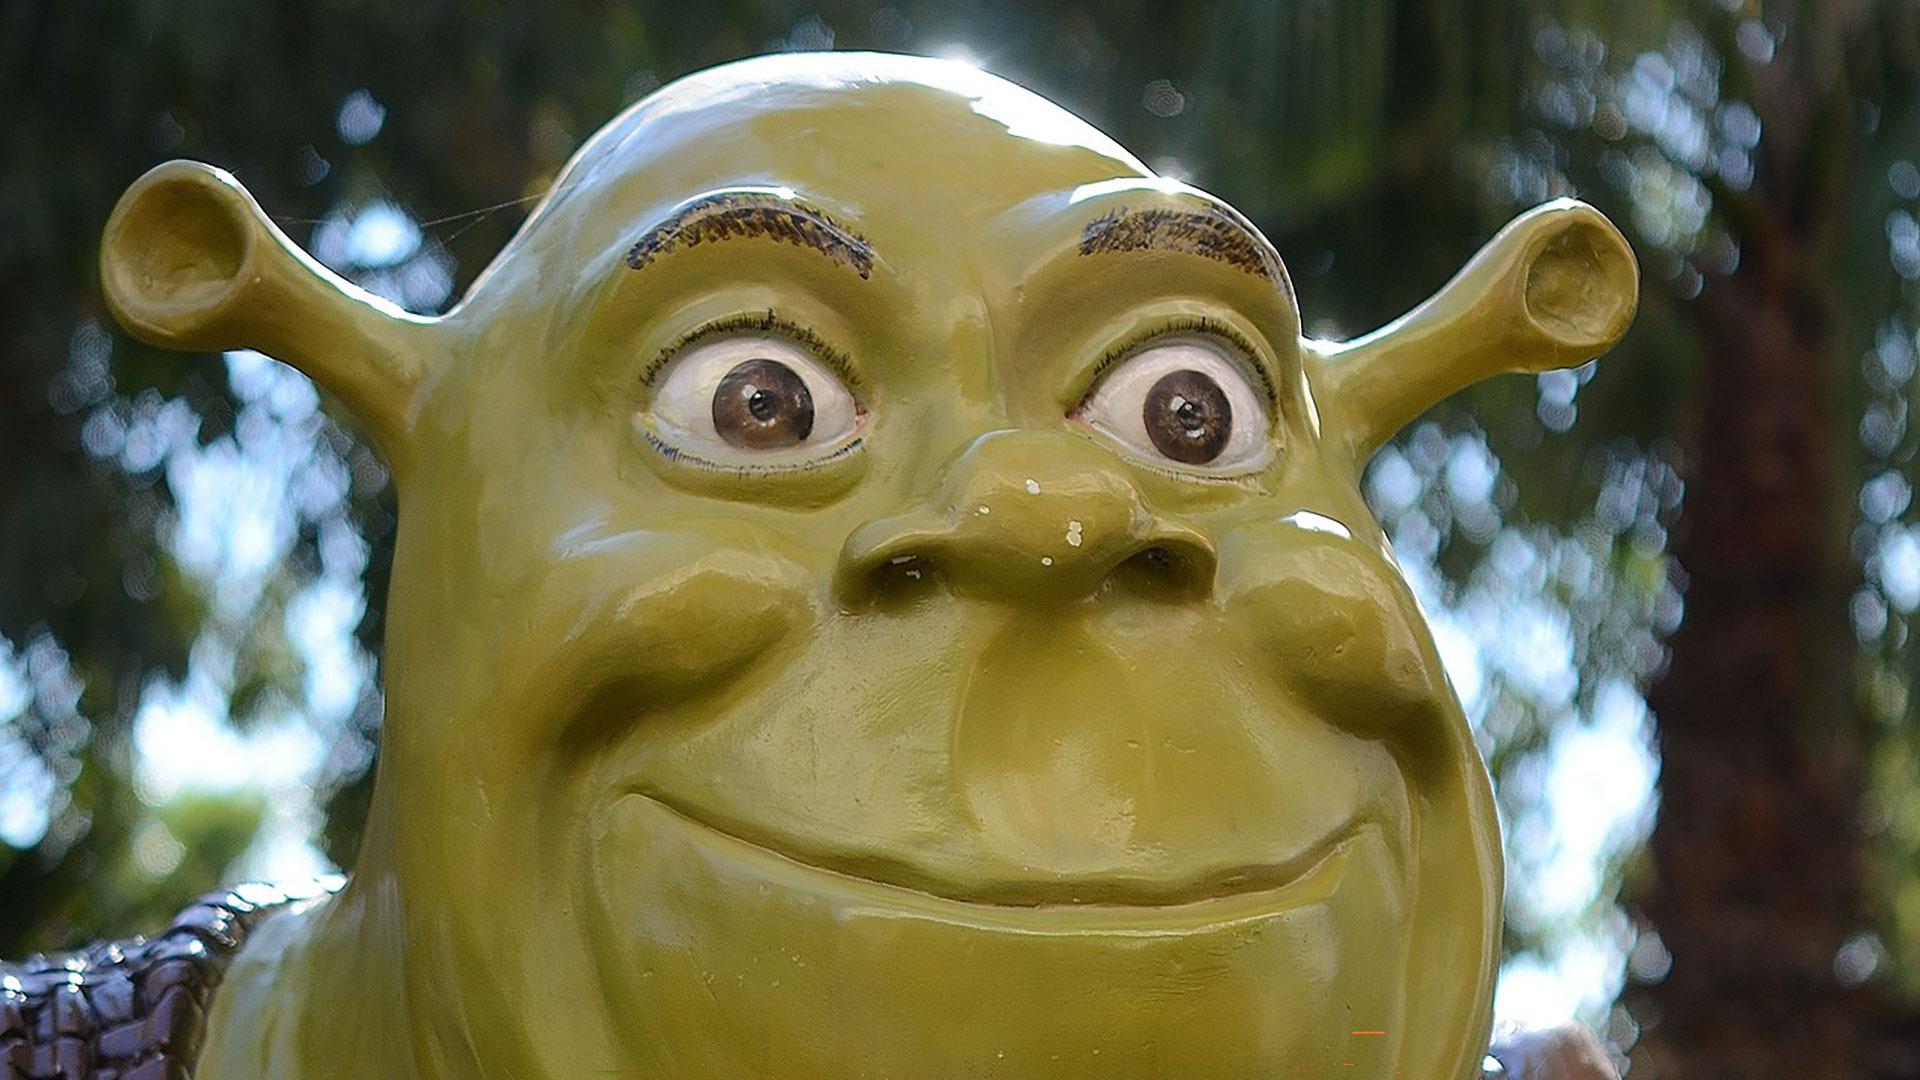 This is what the viral Shrek Rave looks like